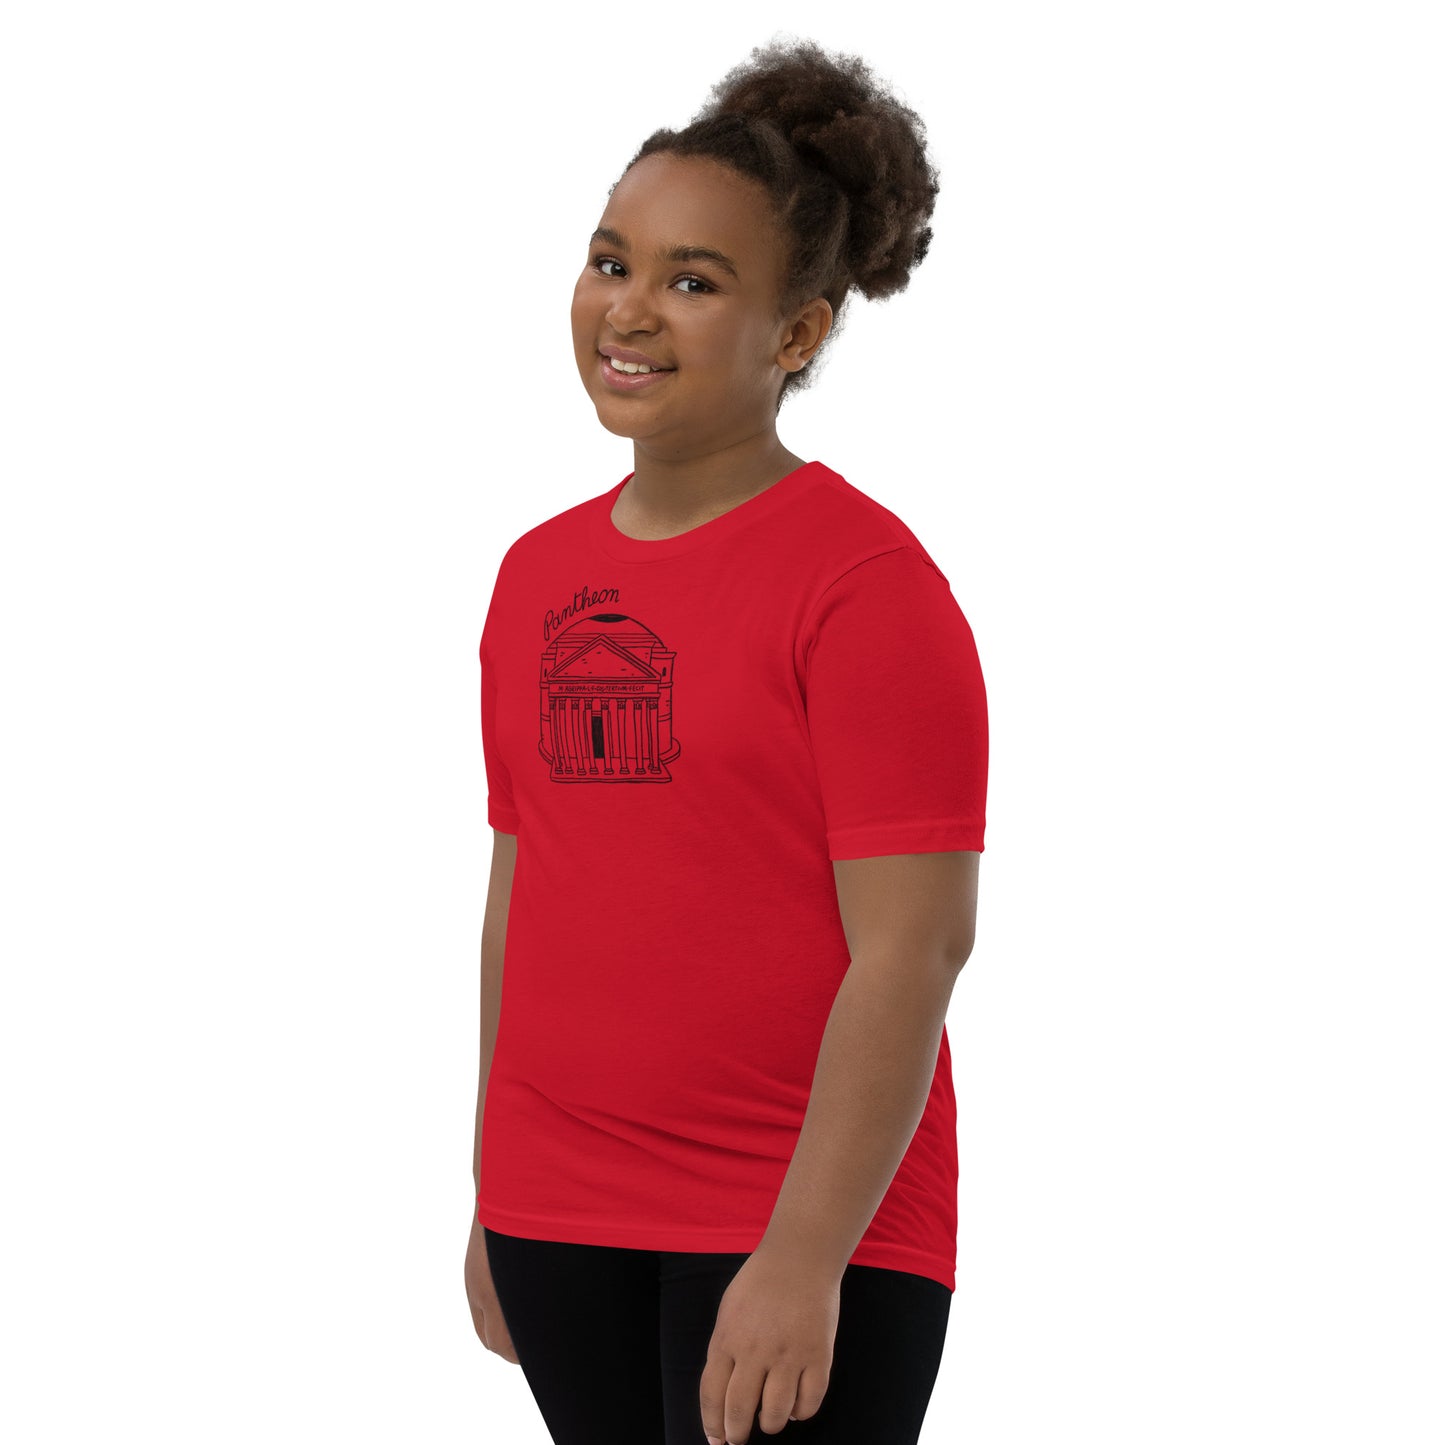 Pantheon on a Youth Short Sleeve T-Shirt